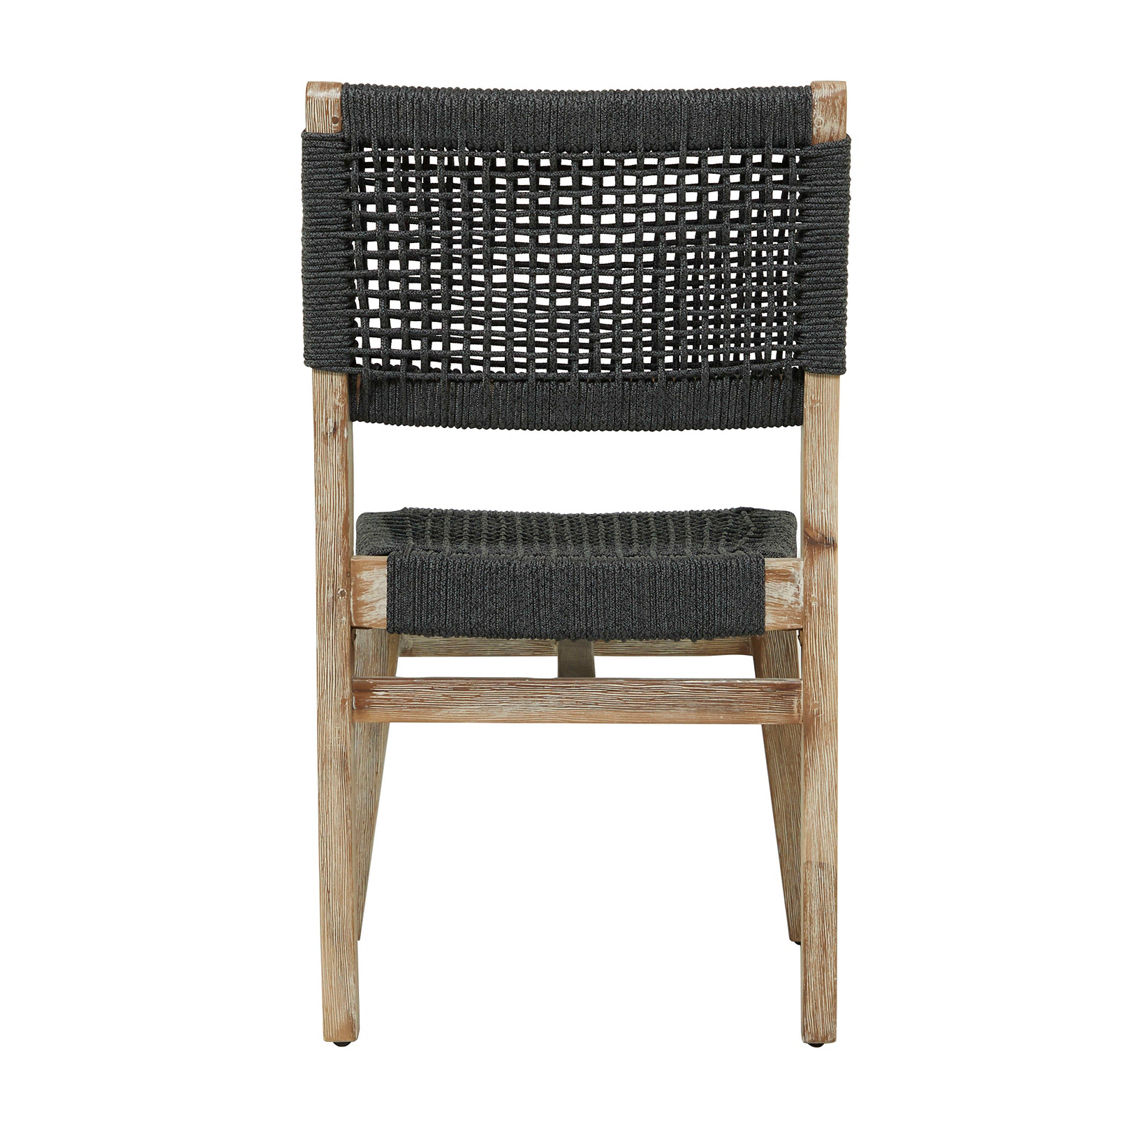 Morgan Hill Home Contemporary Dark Gray Wood Outdoor Dining Chair Set - Image 3 of 5